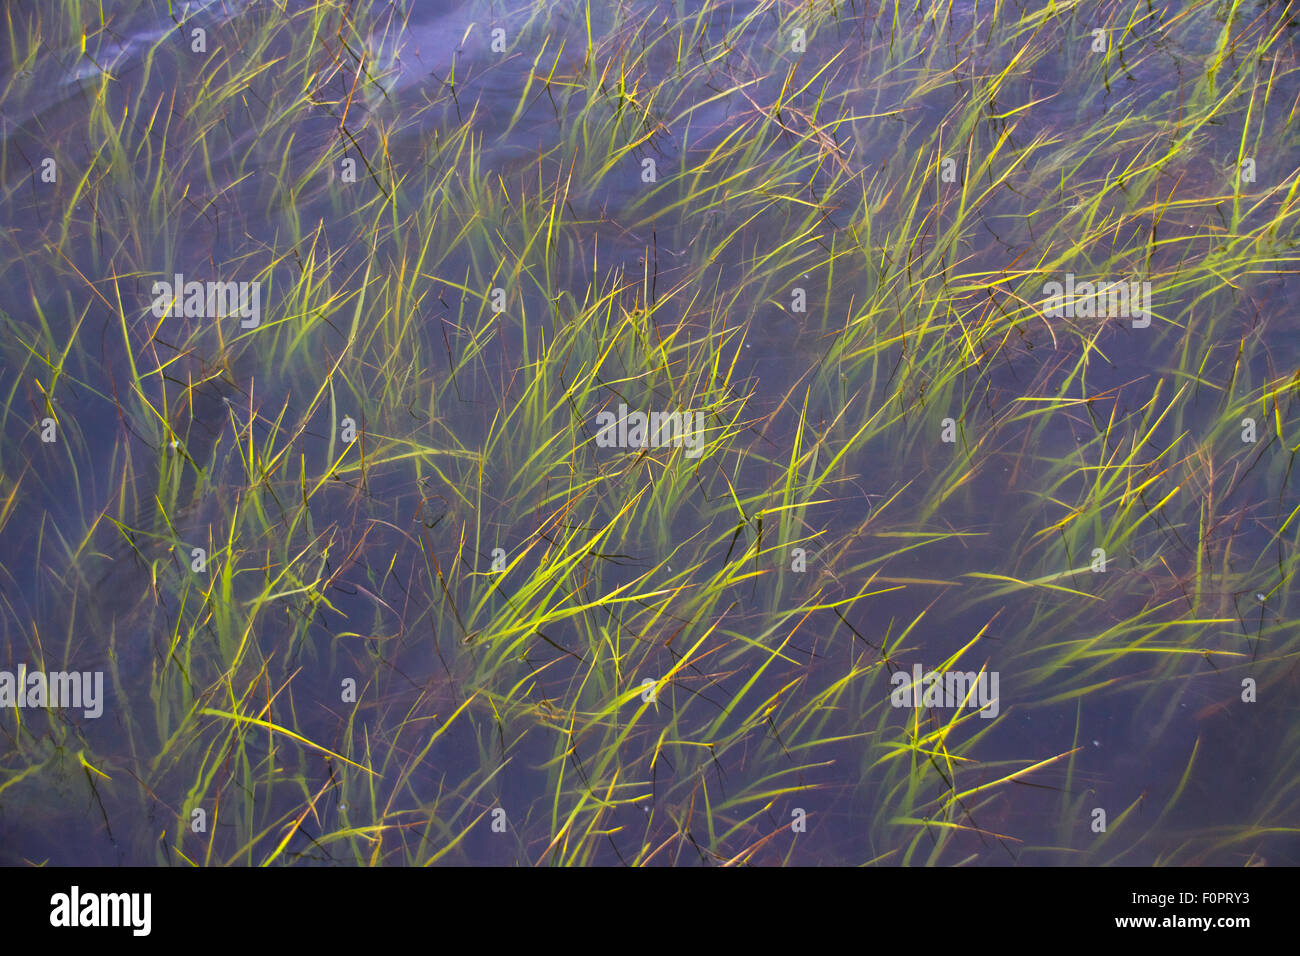 Sea grasses floating in the shallow Gulf of Mexico waters off of Cedar Key Florida Stock Photo